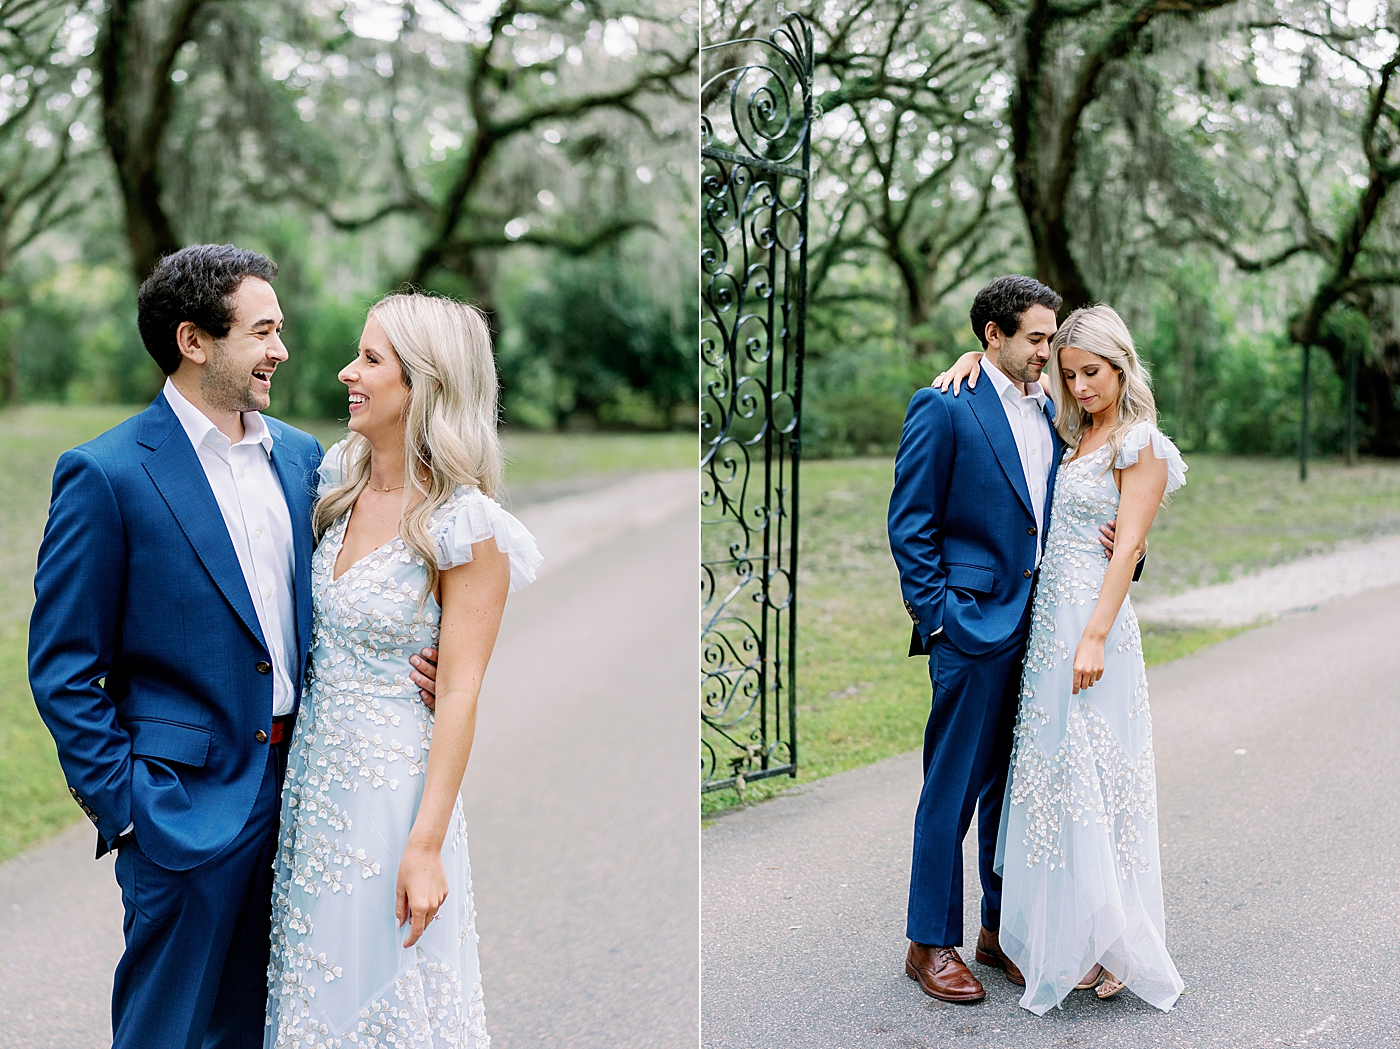 Couple embracing at Legare Waring House | Intimate Charleston Engagement Session with Annie Laura Photo